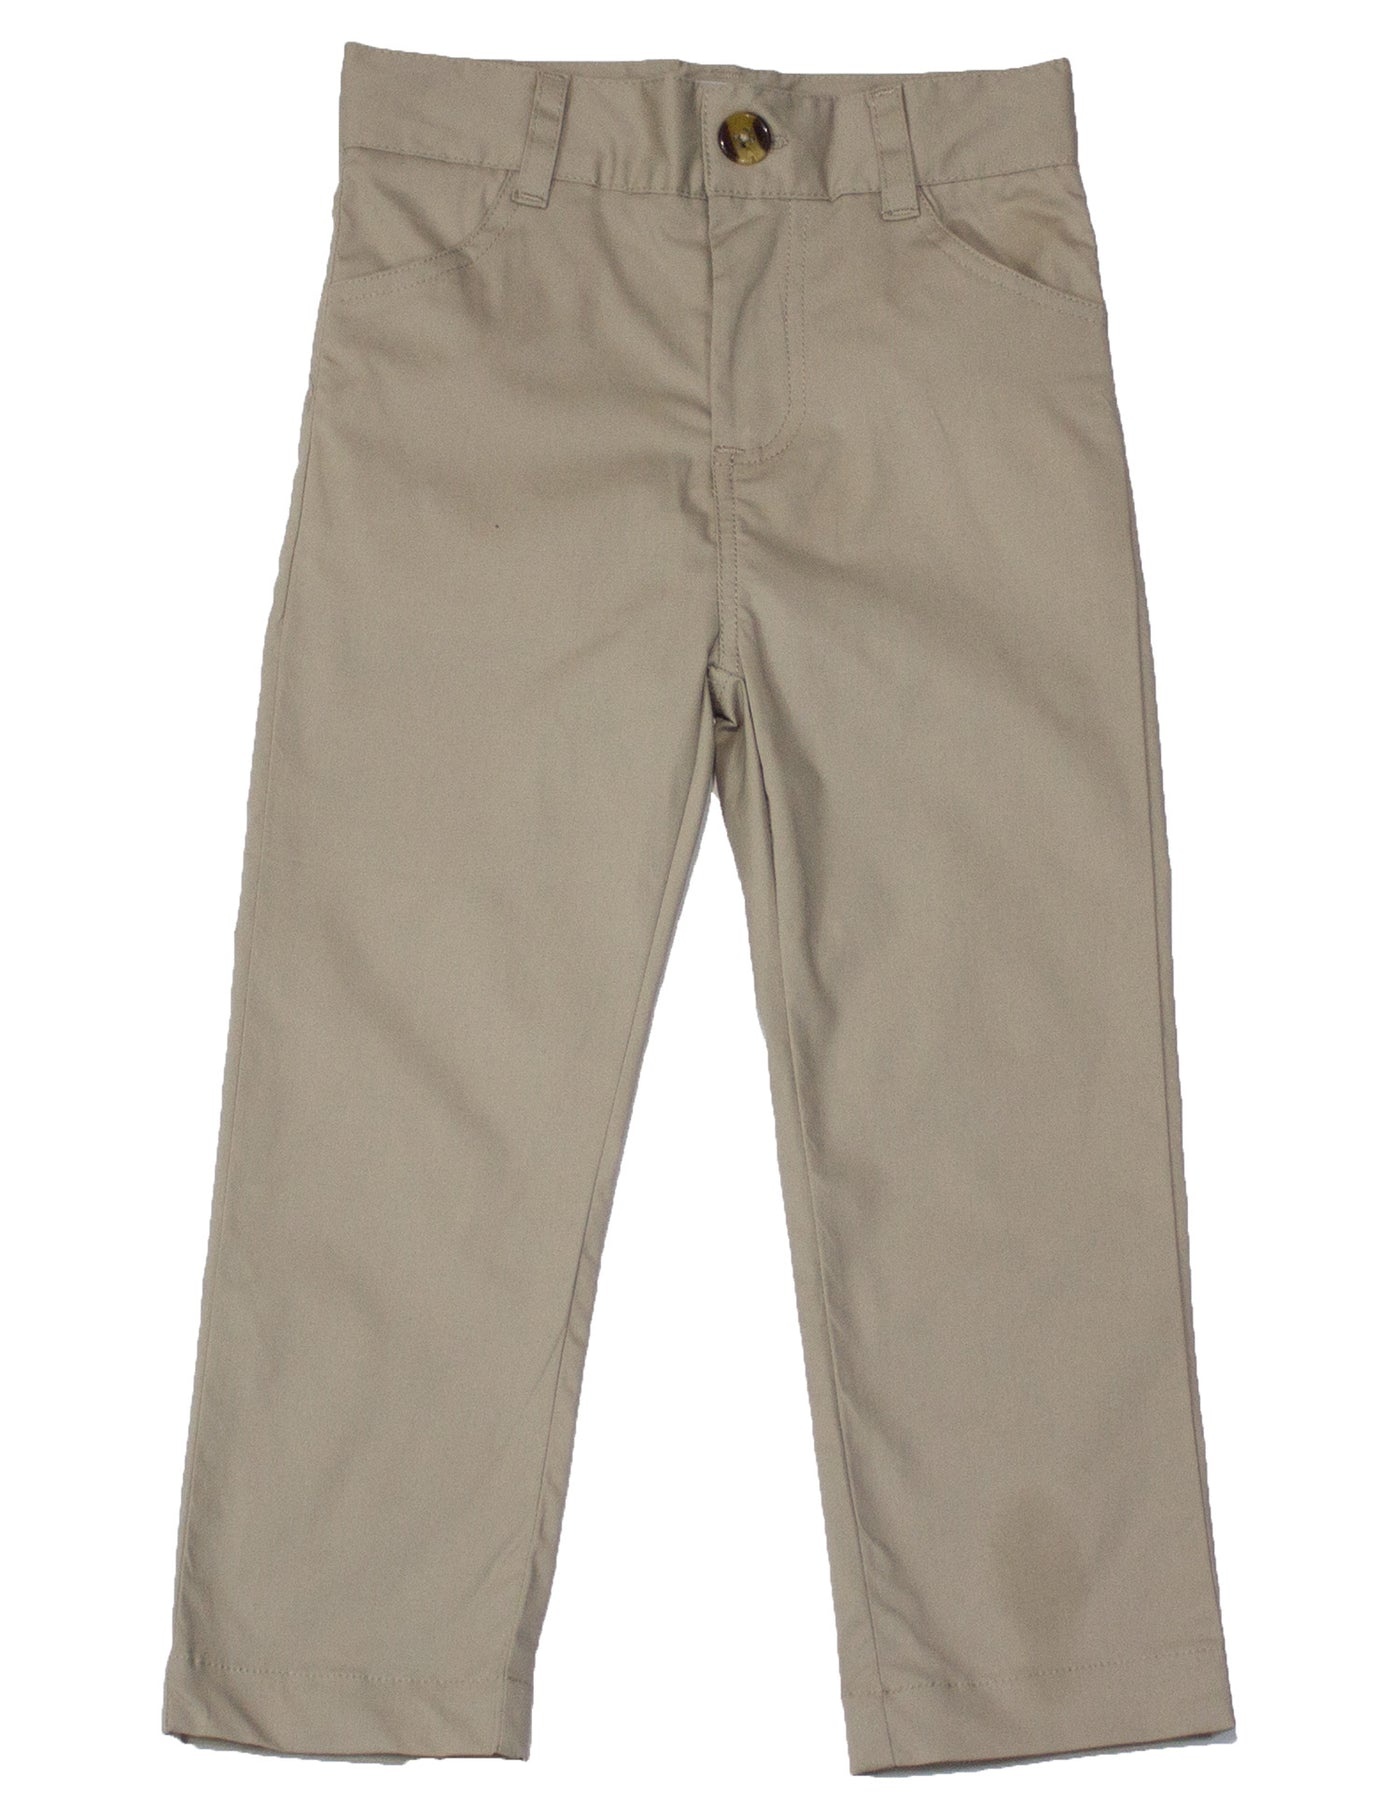 Slide View: 3: BDG Charleston Relaxed-Fit Pant | Clothes for women,  Clothes, Women clothes sale